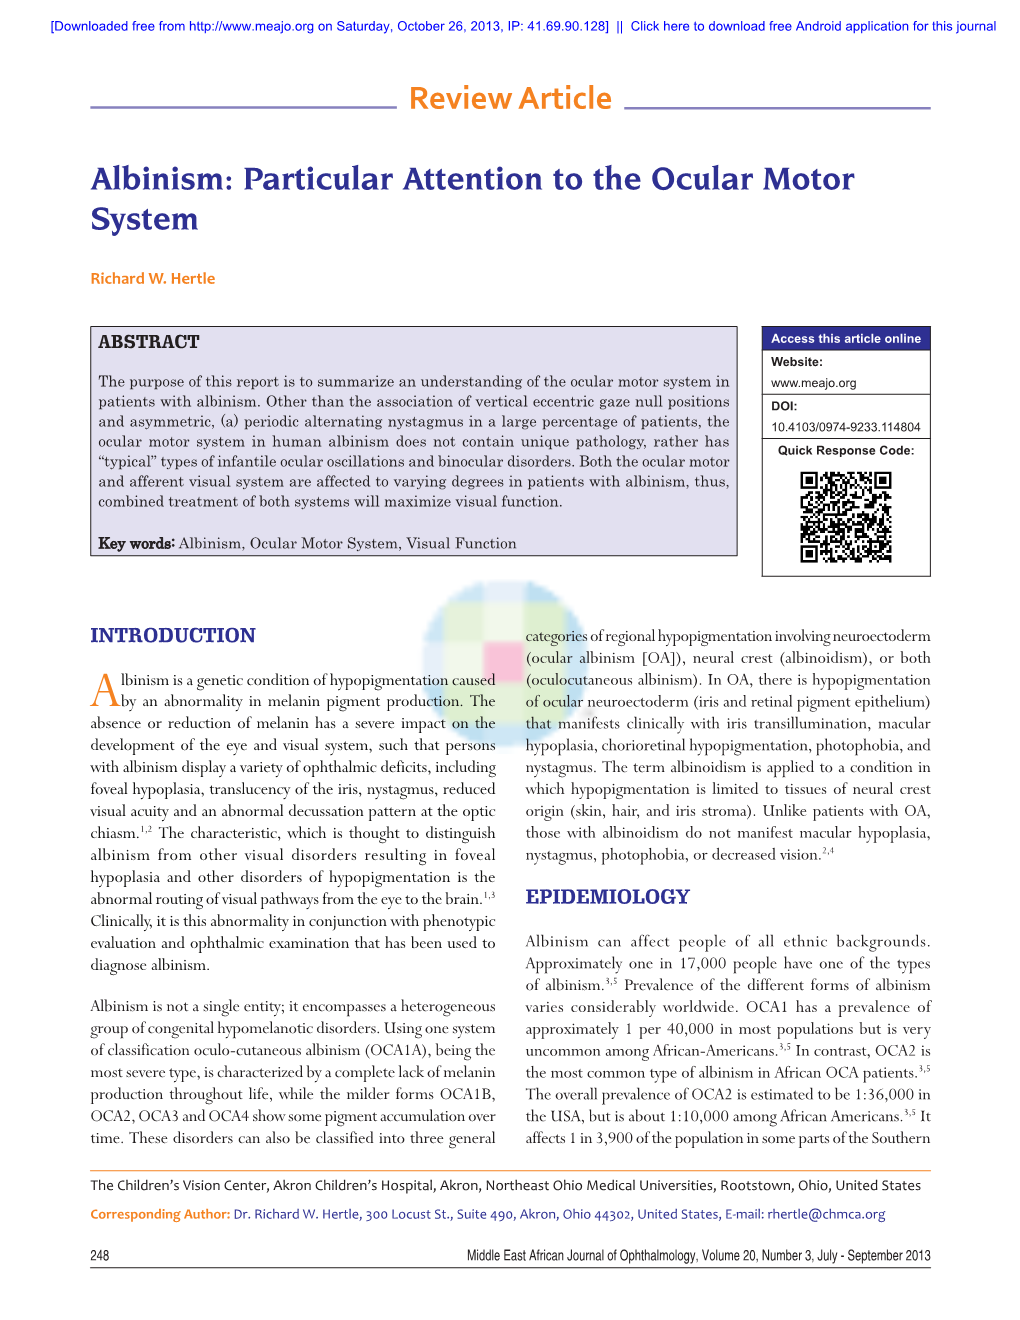 Review Article Albinism